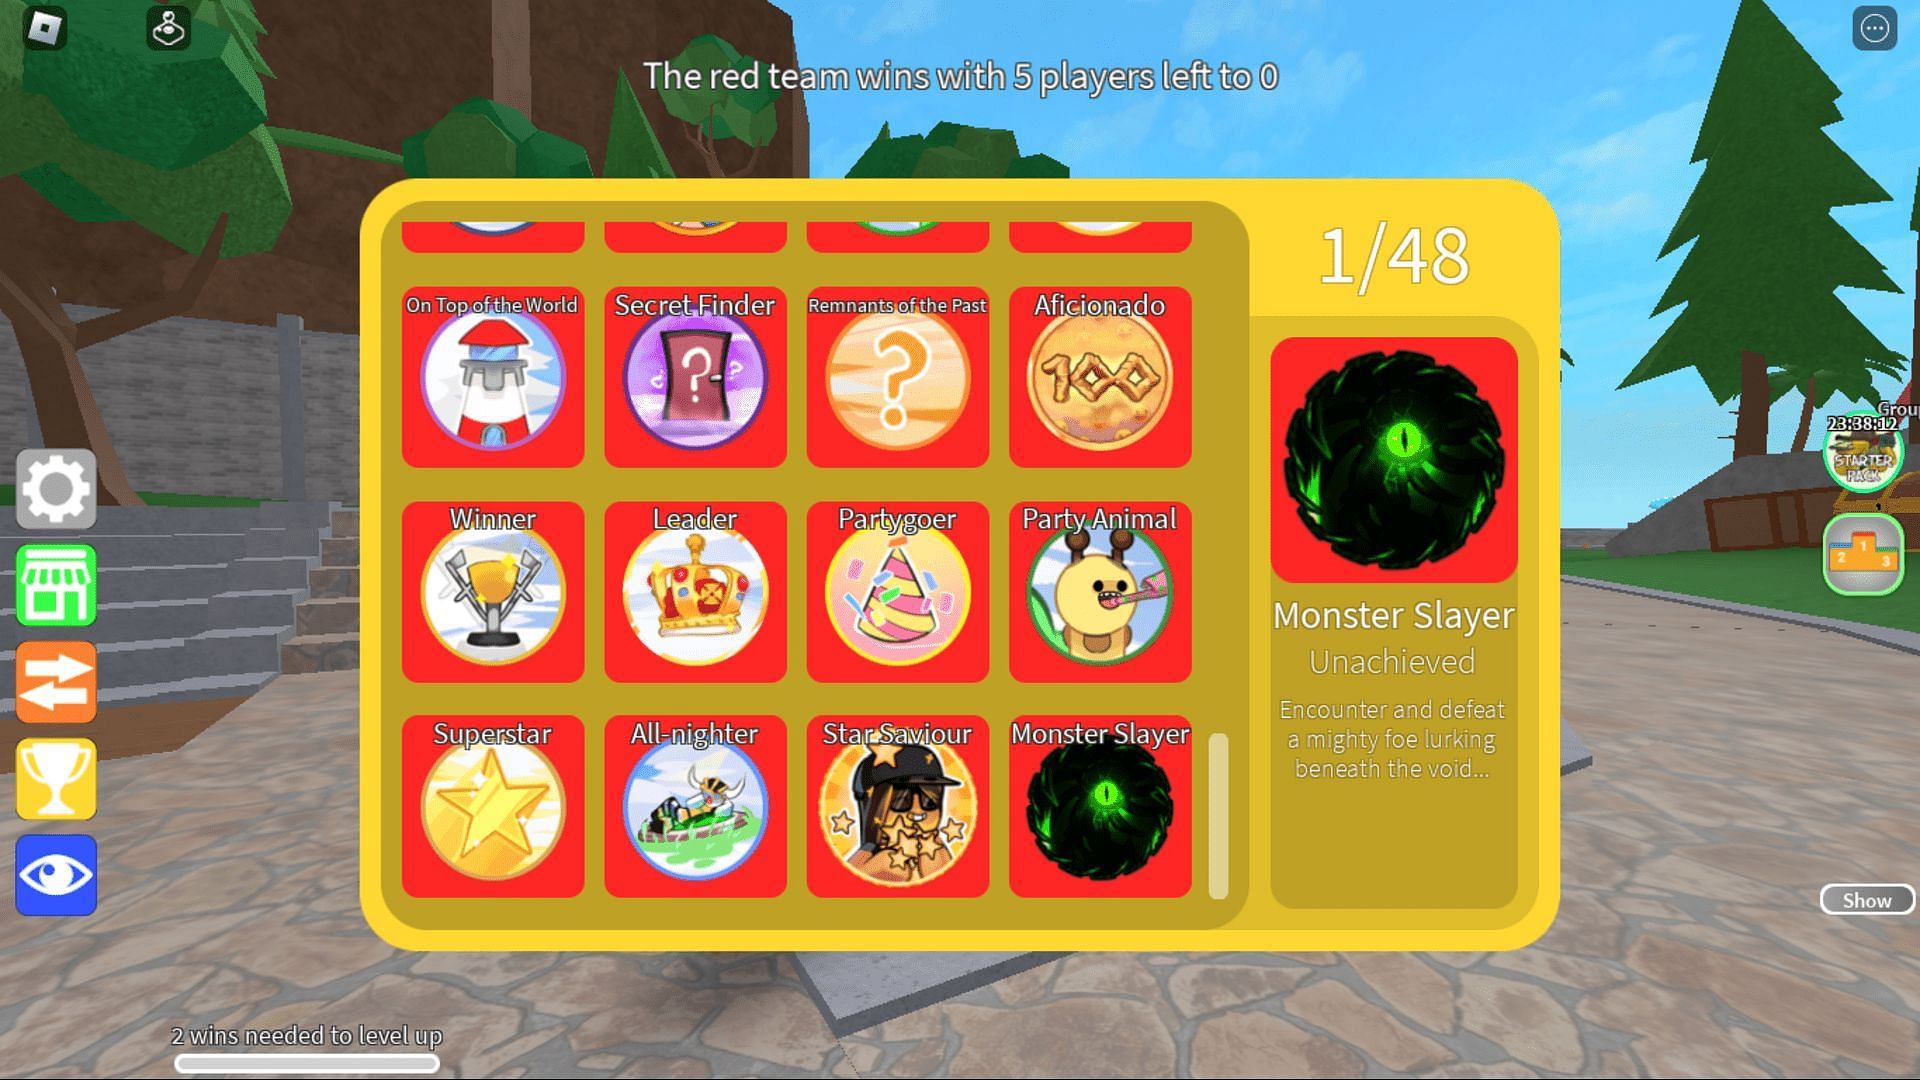 The various collectible badges in Epic Minigames (Image via Roblox)